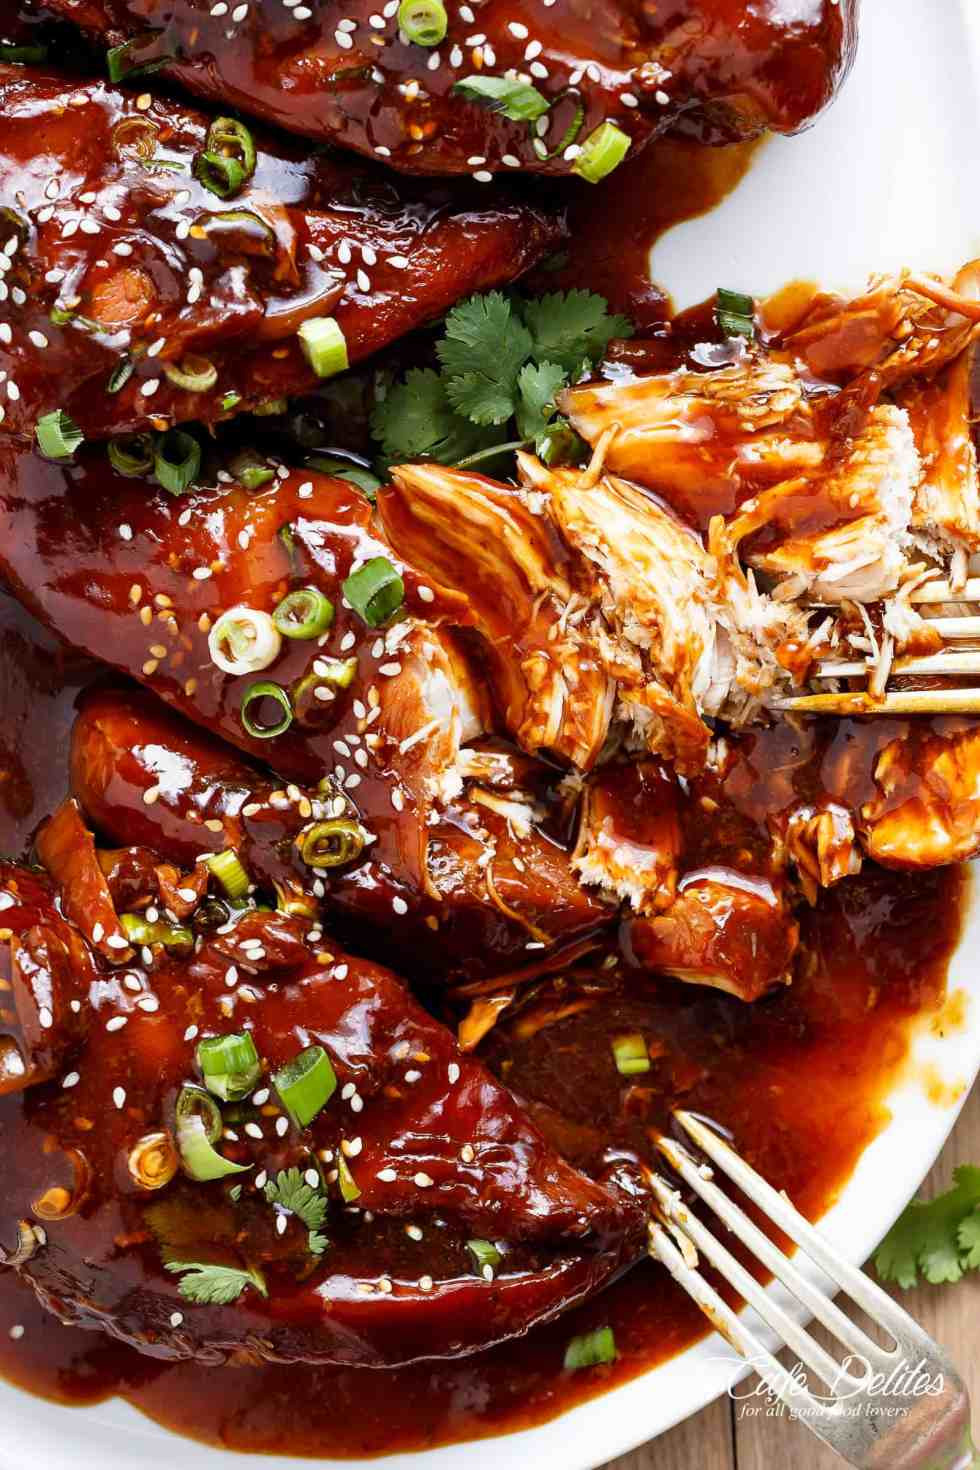 Slow Cook Chicken Thighs
 Slow Cooker Asian Glazed Chicken Cafe Delites